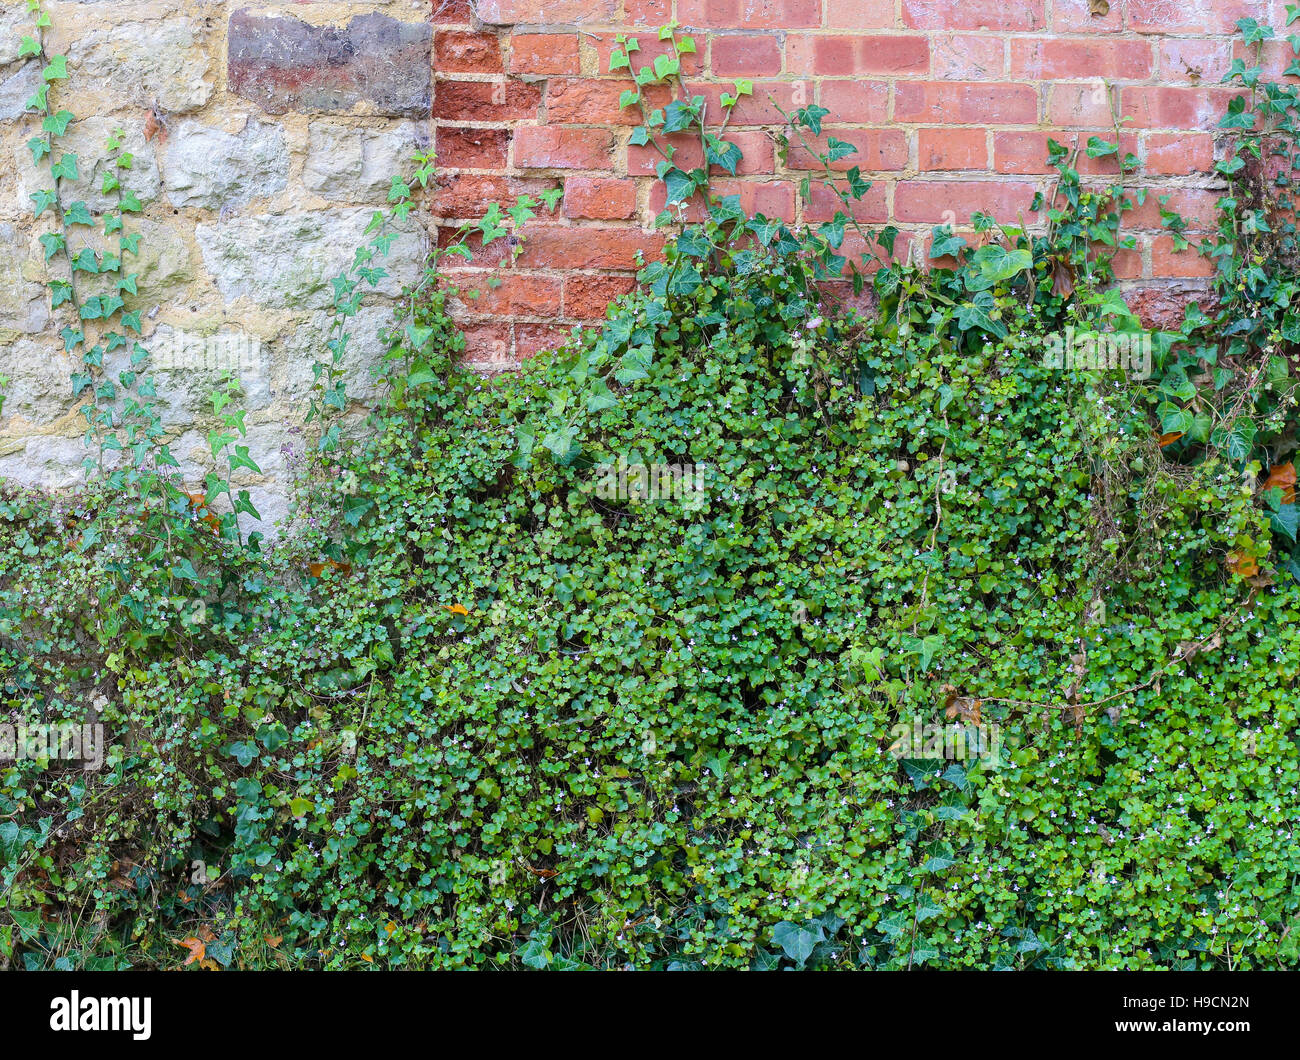 Wall climbing ivy and green covering plants on red brick and stone wall Stock Photo